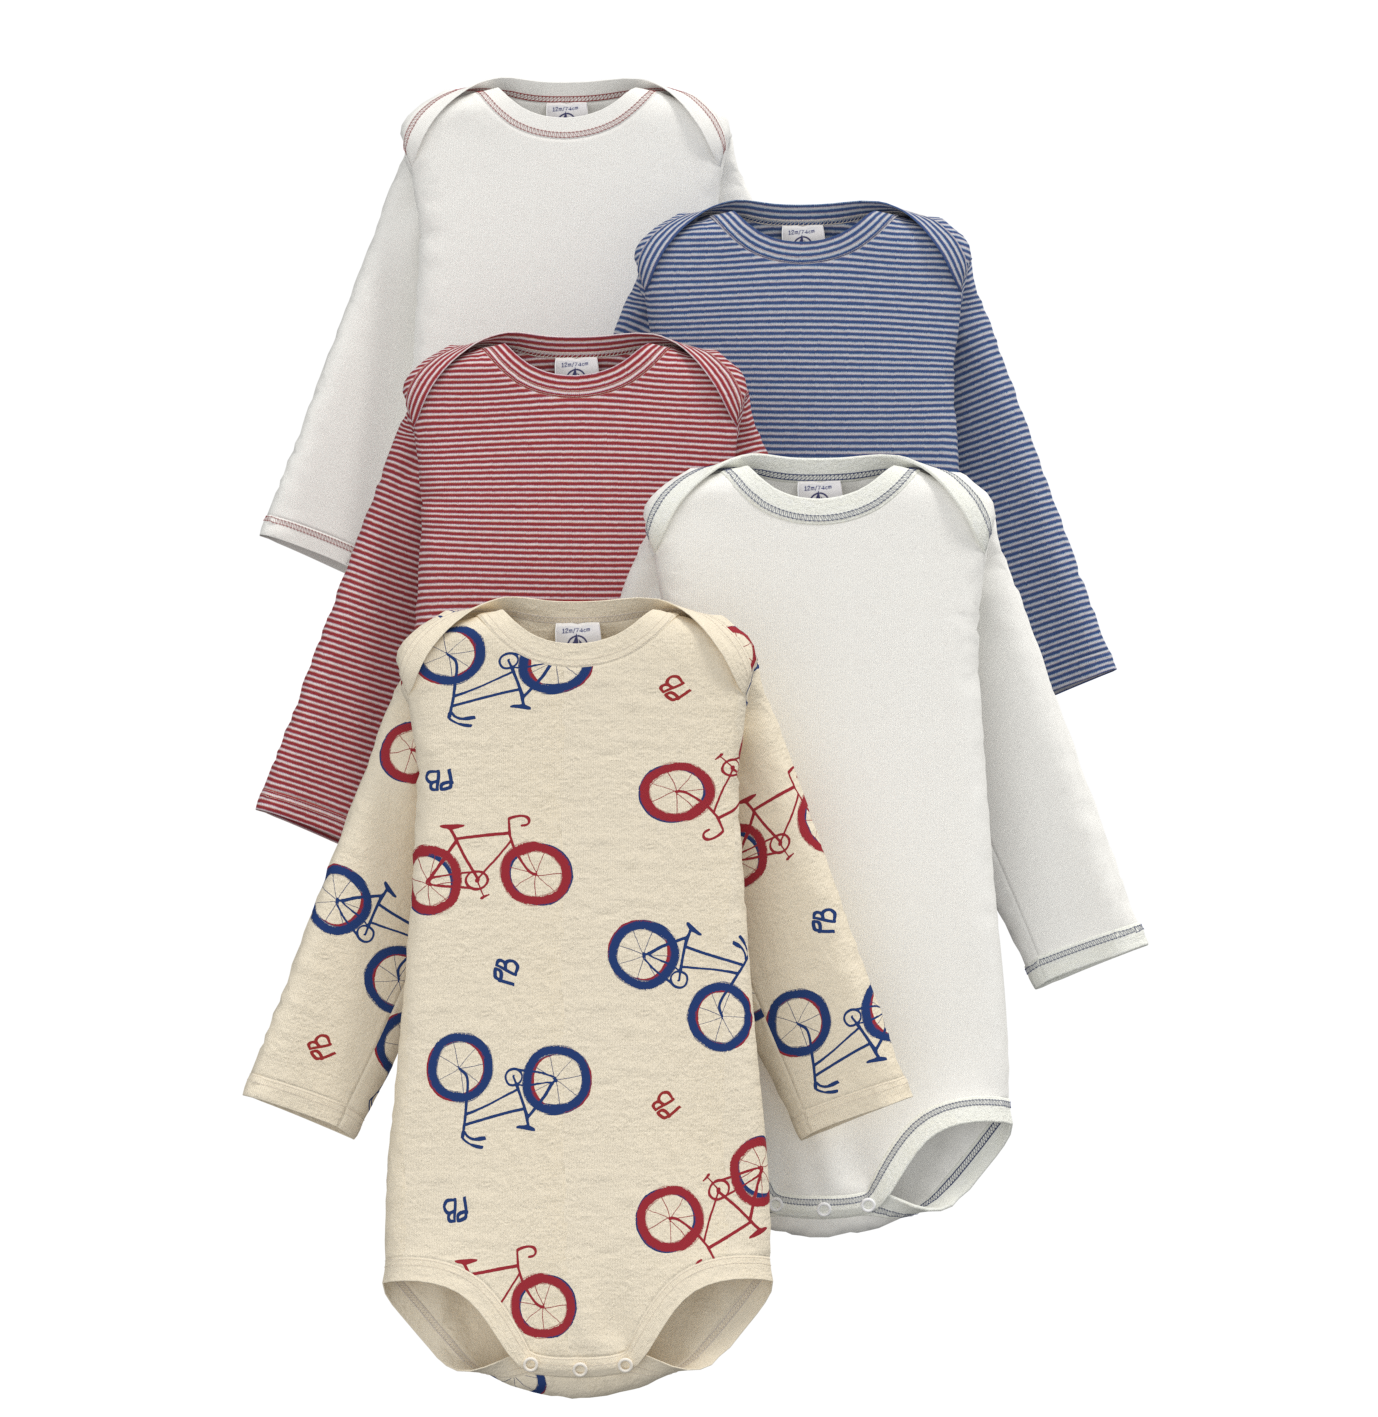 The Importance of High Quality Baby Clothes